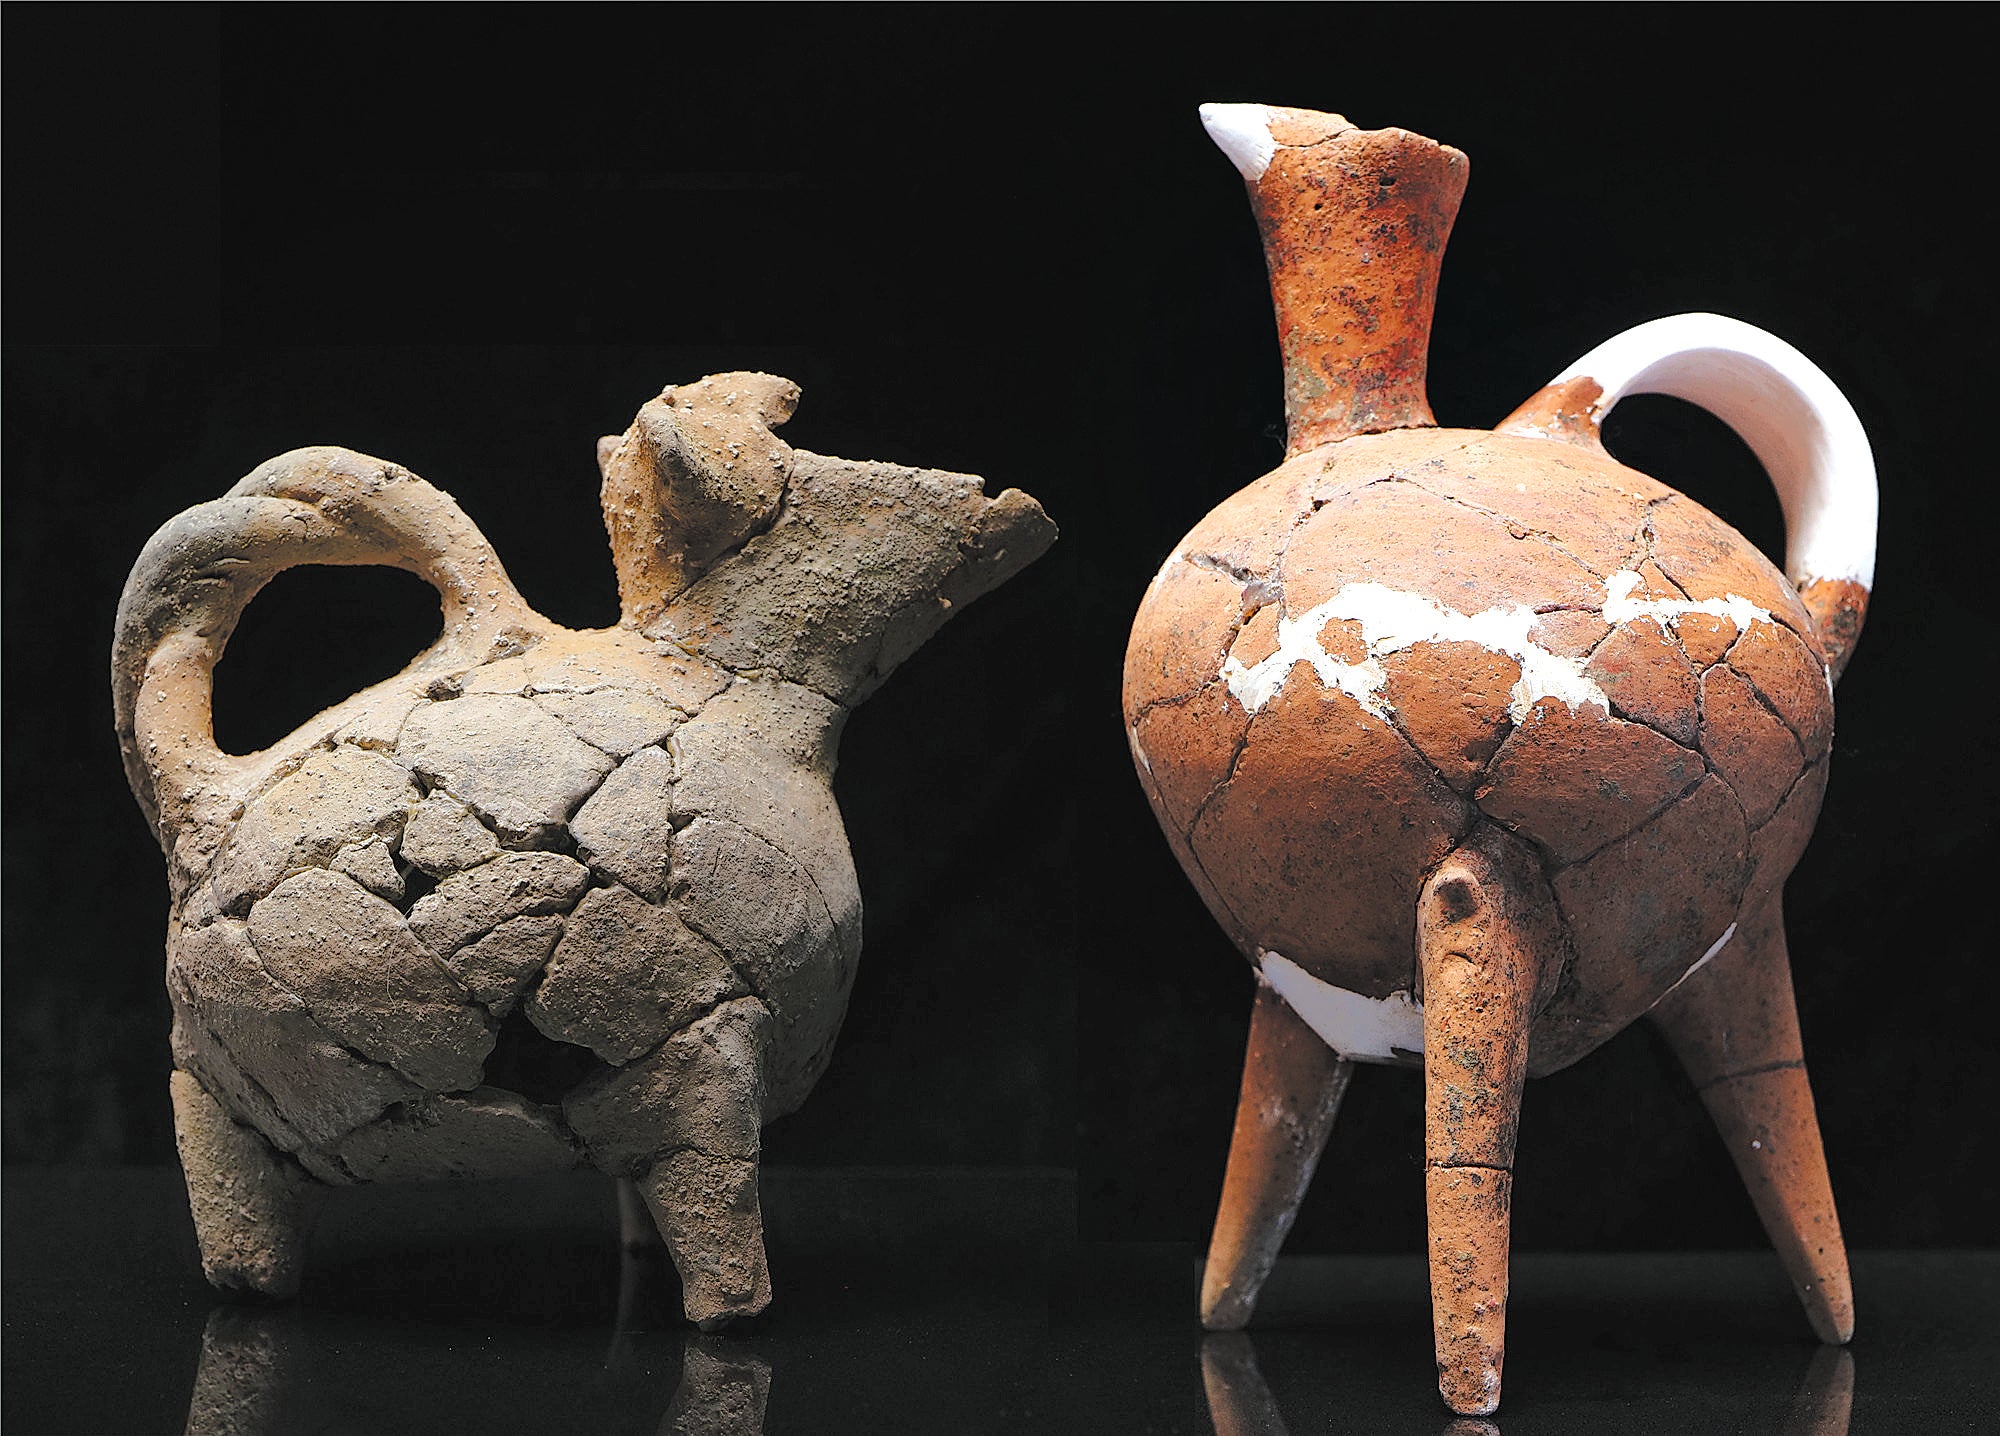 Pottery ware unearthed from the Wangzhuang site in Yongcheng, Henan province